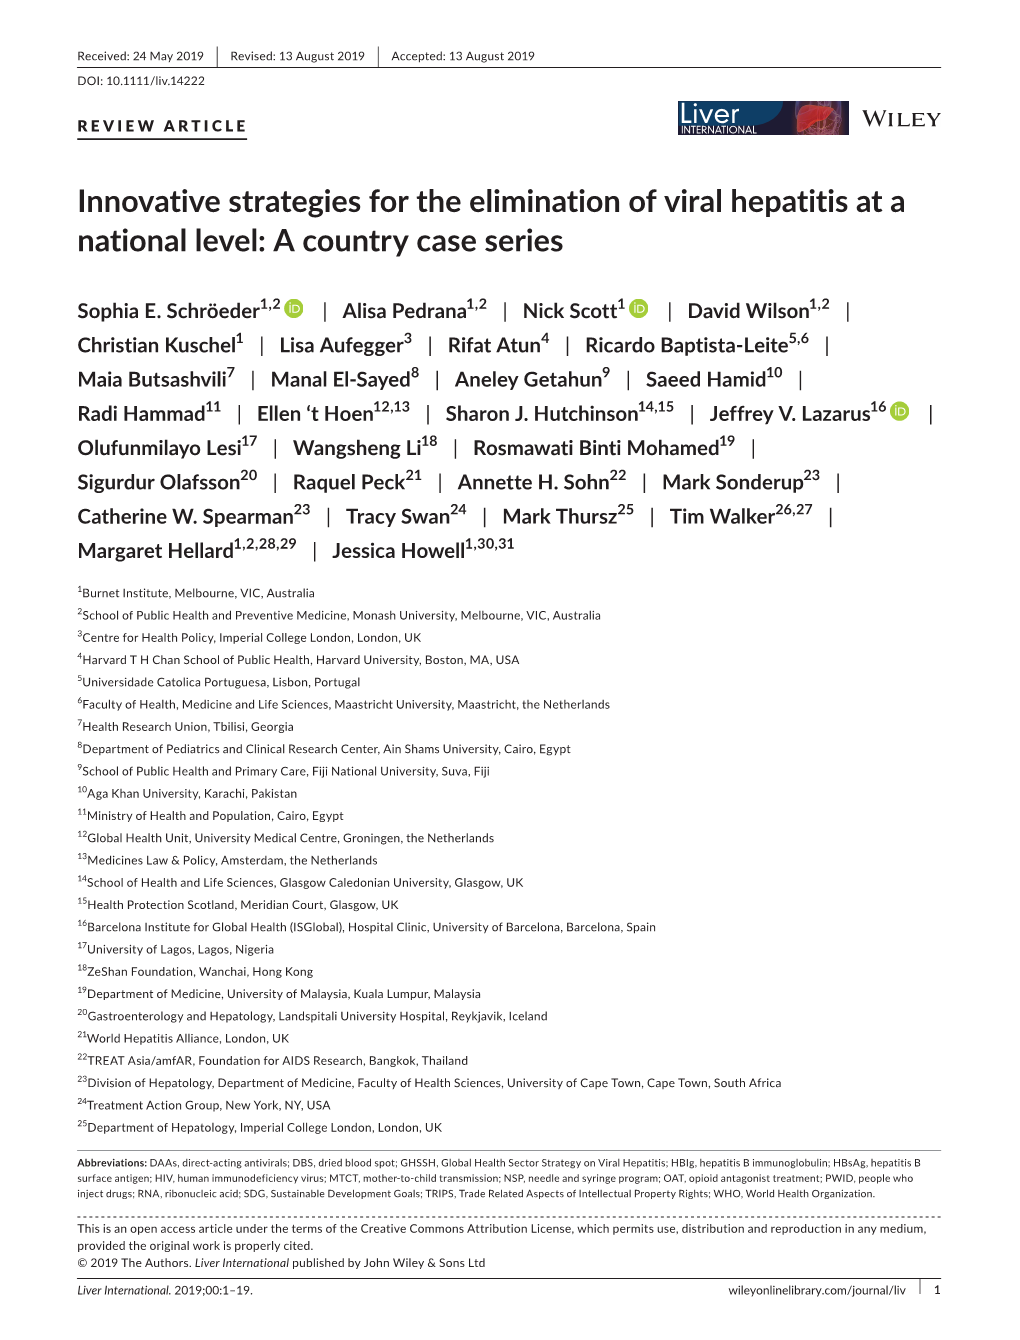 Innovative Strategies for the Elimination of Viral Hepatitis at a National Level: a Country Case Series